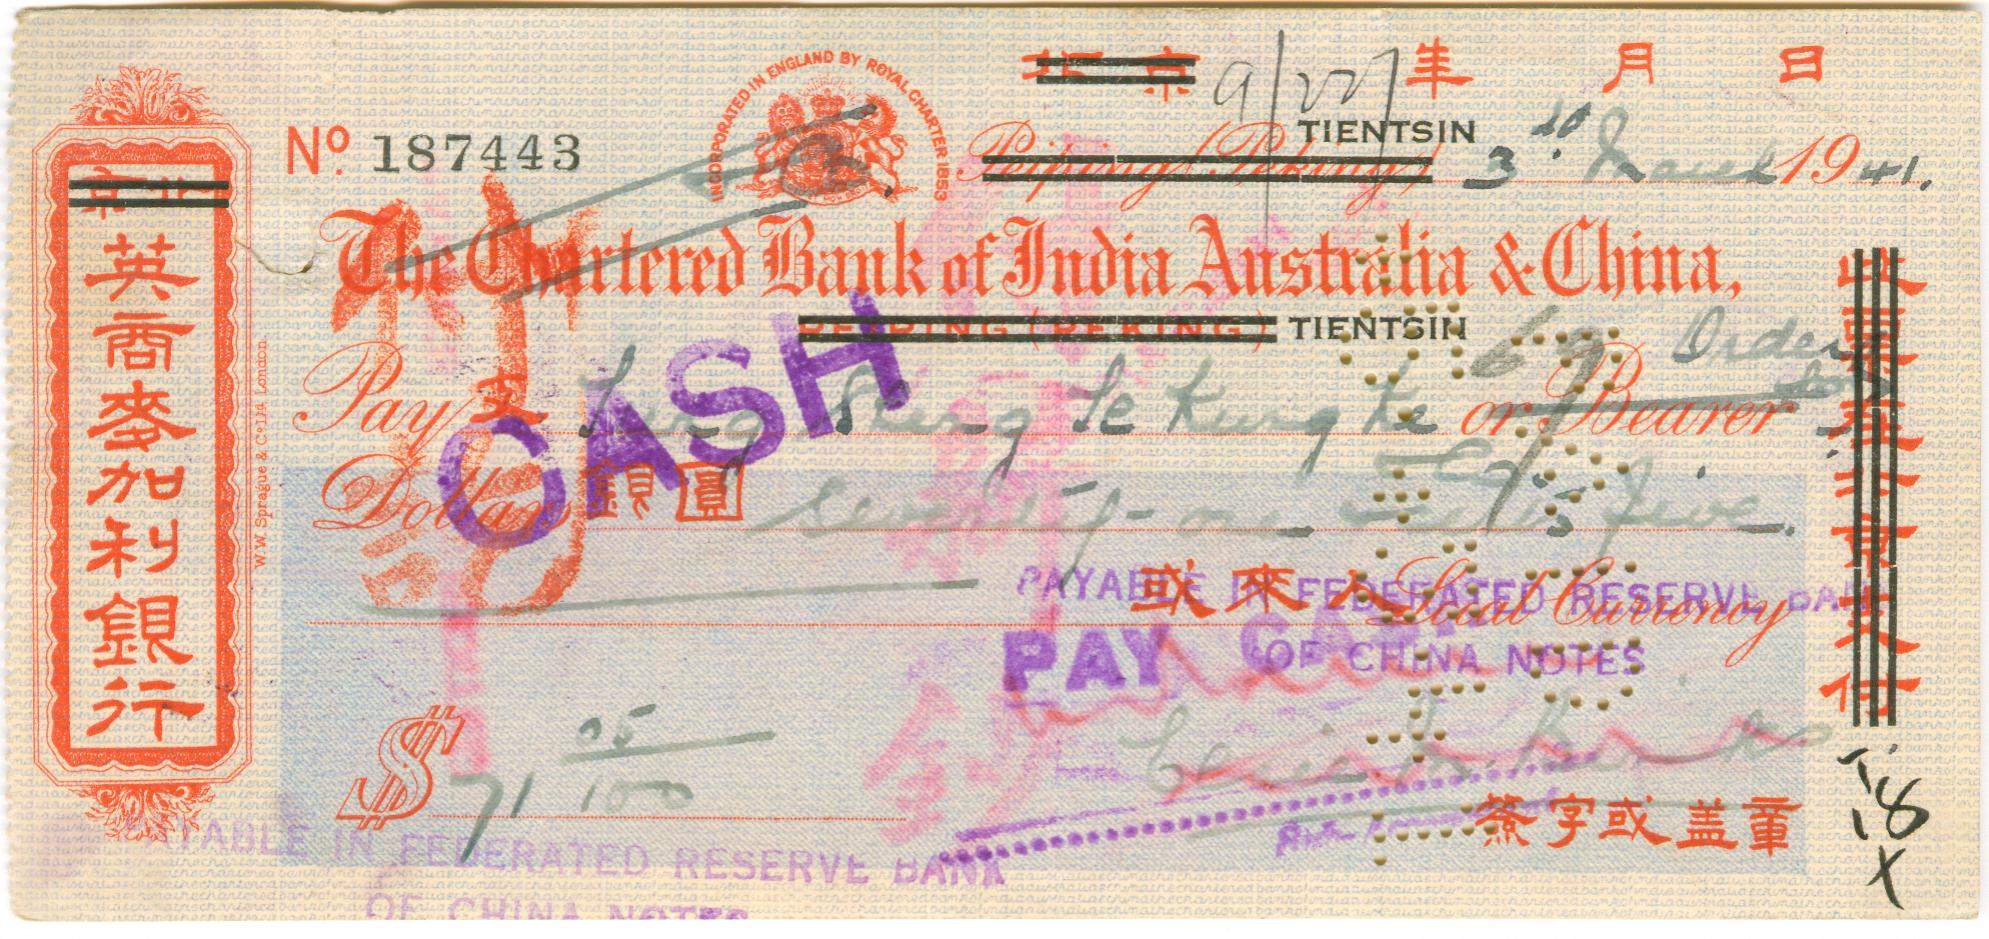 D2421, Check of Charted Bank of India, Australia & China (Red), 1940's